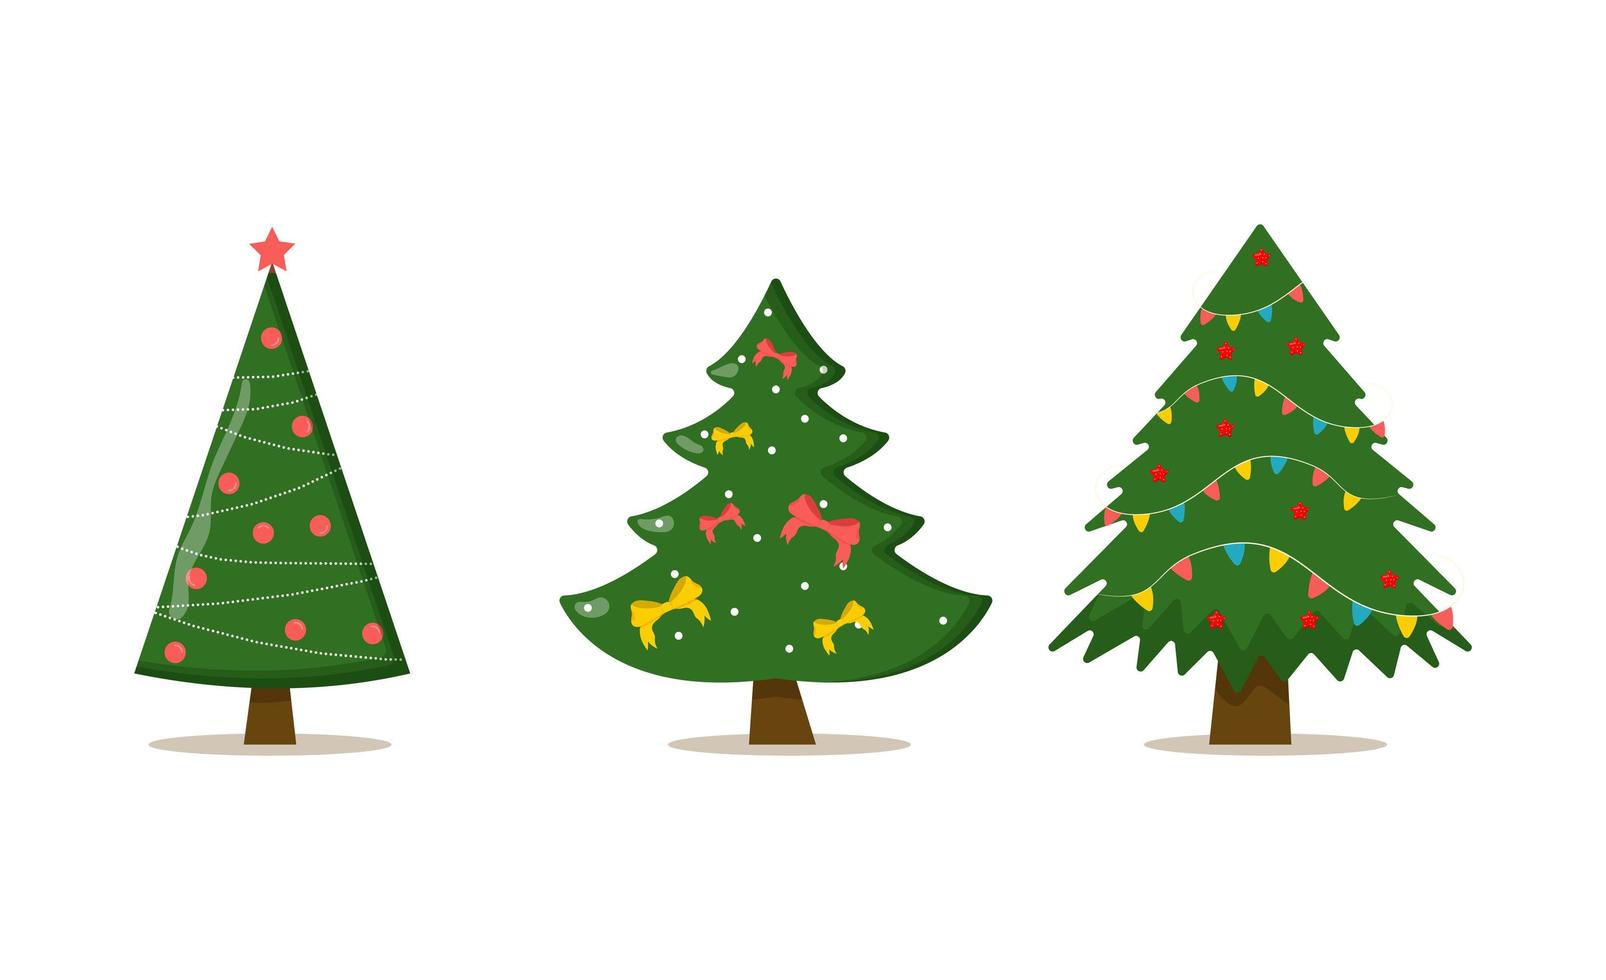 Set of christmas trees with tree ball and tree toy. Flat vector illustration